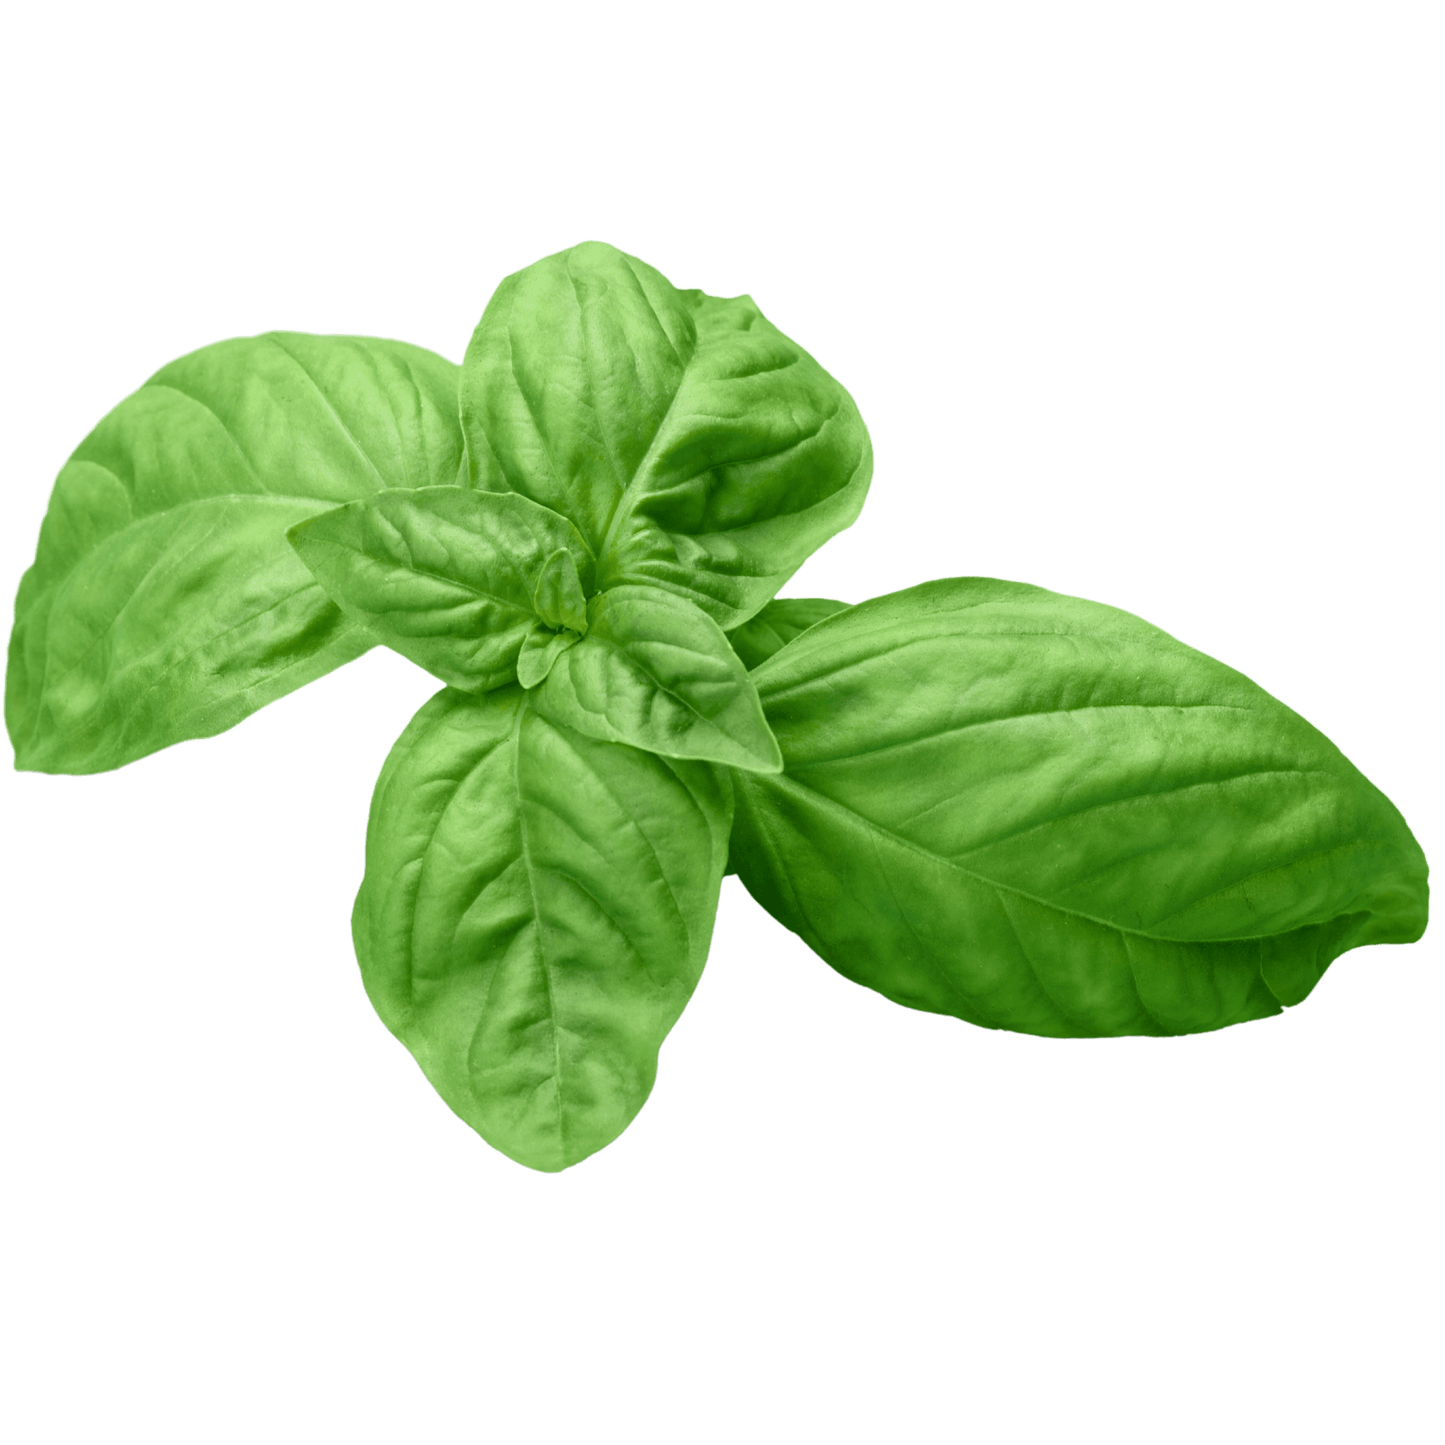 Green harvested basil leafs grown from basil seeds available on Hastyroots.com